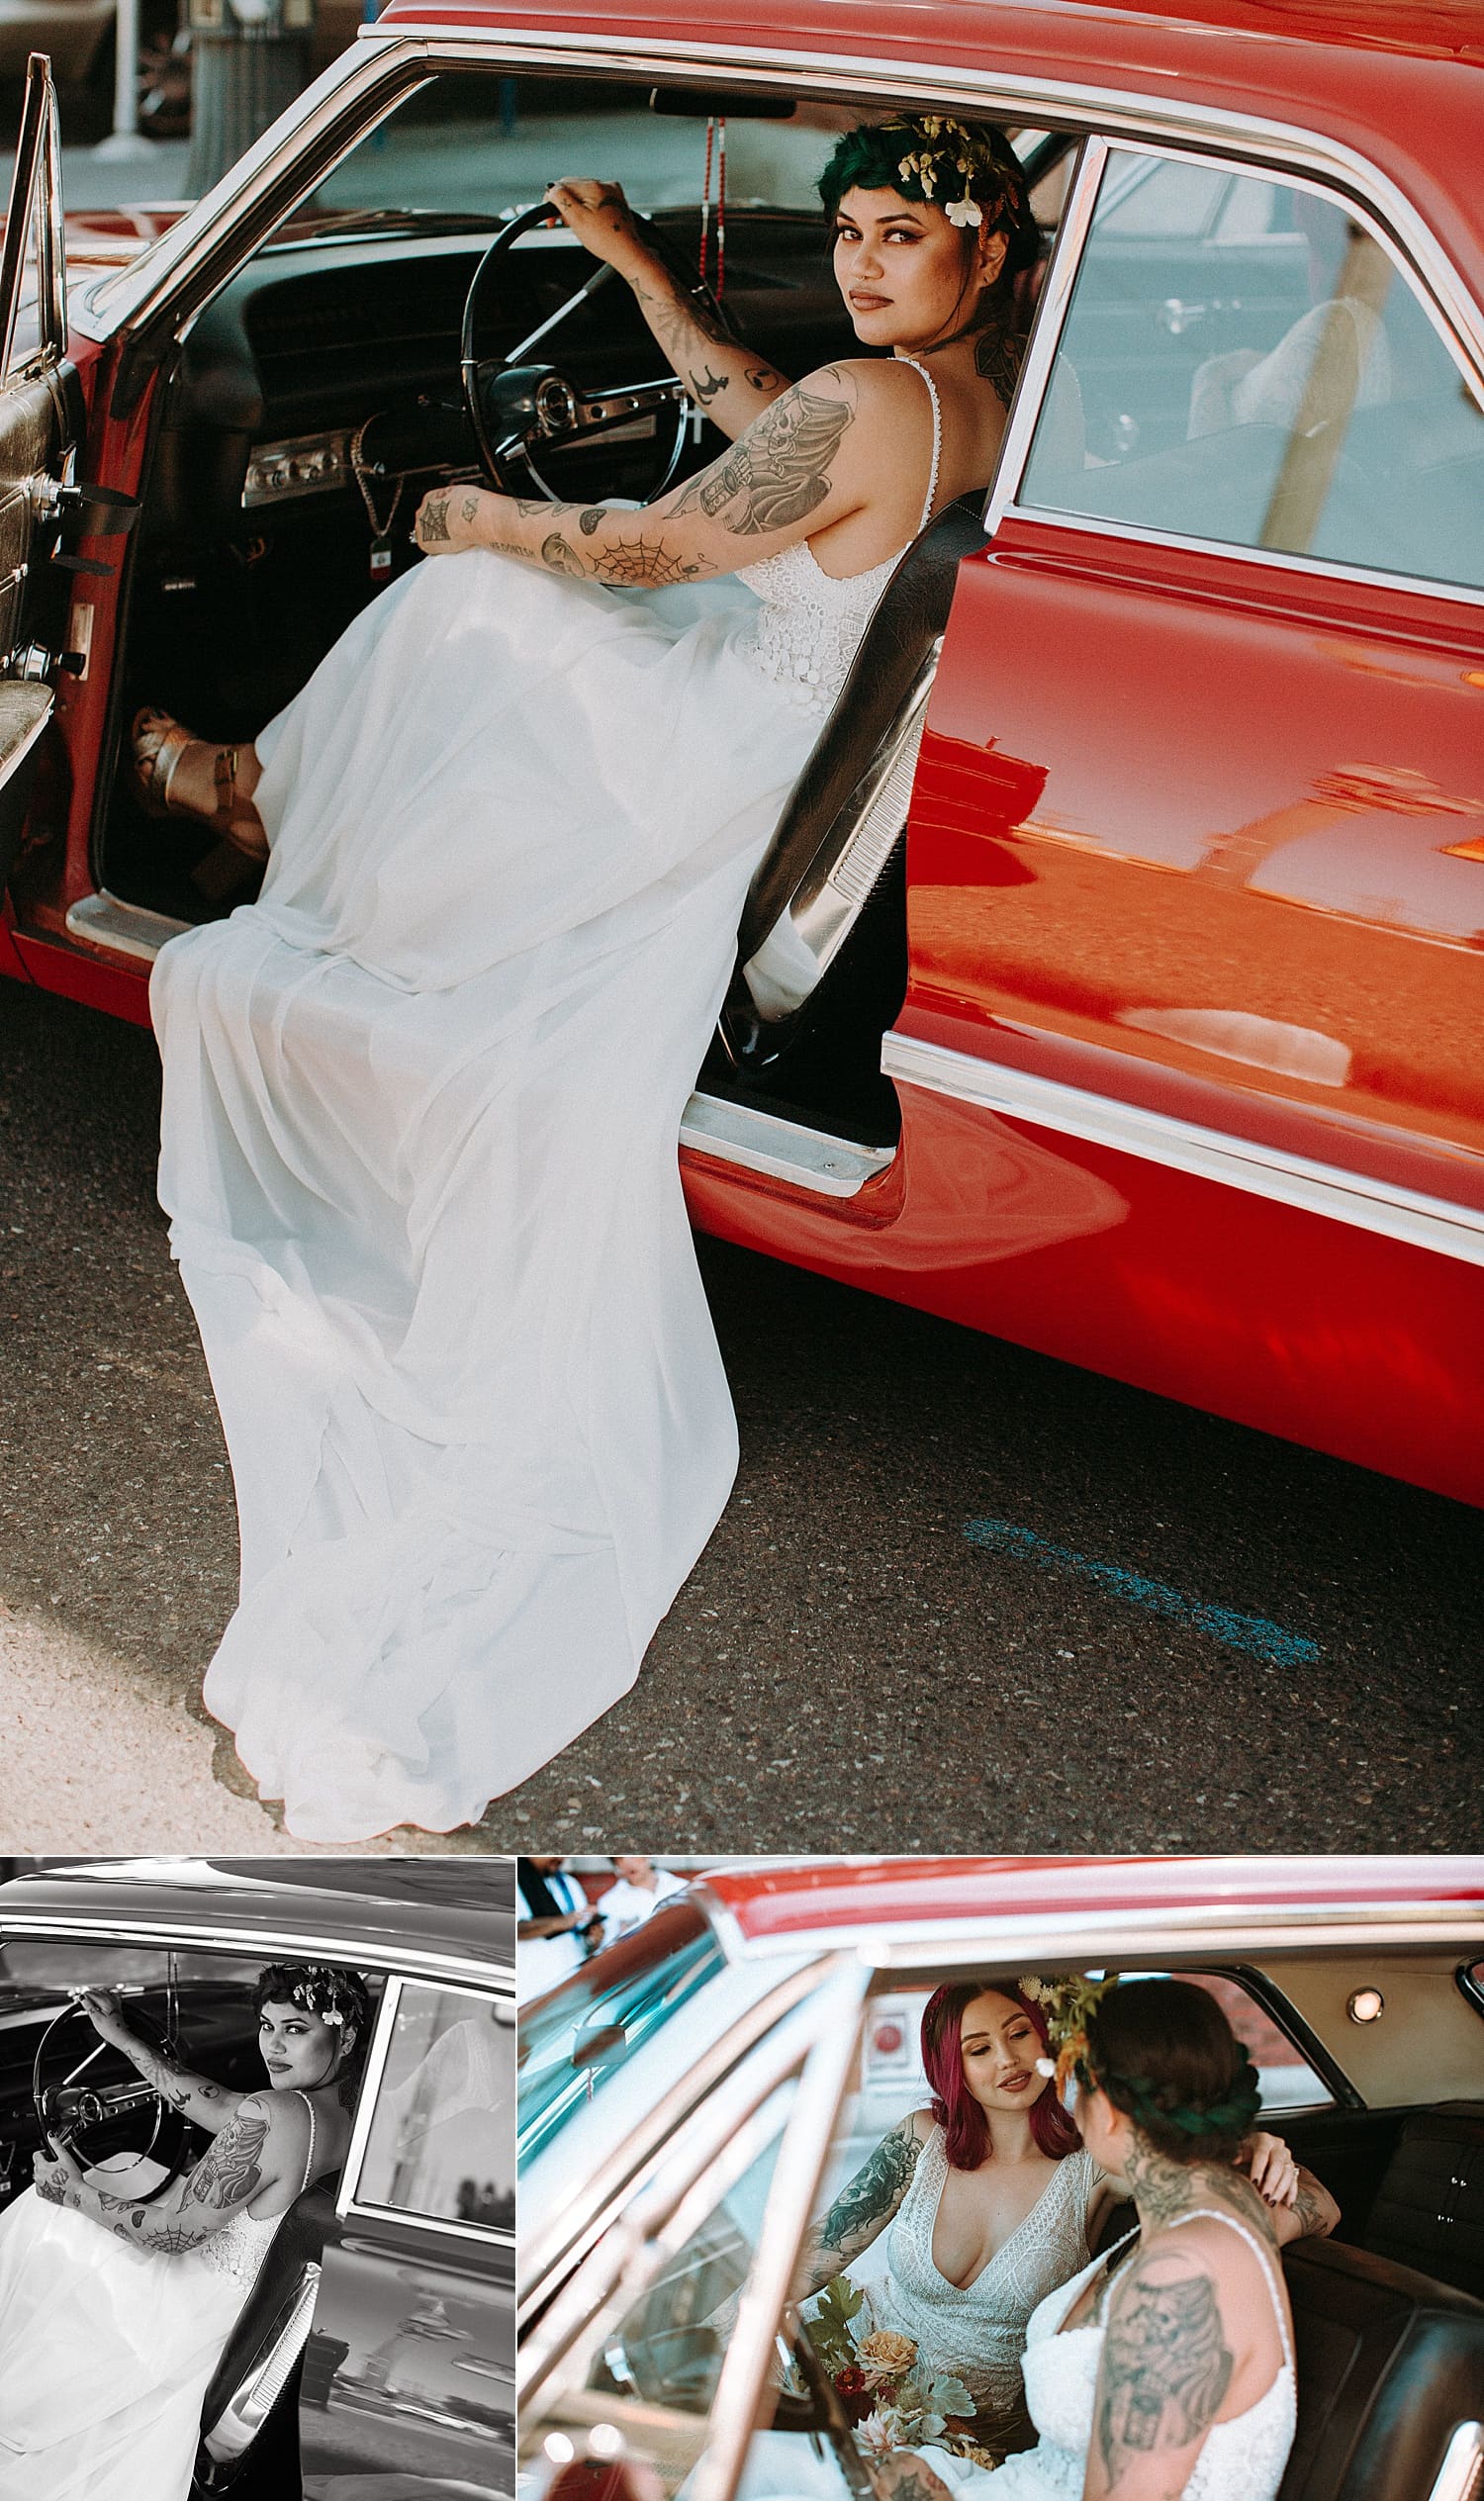 beautiful edgy pink and green haired tattoo mexican brides posing next to a vintage car by Marcela Pulido Portland Wedding Photographer